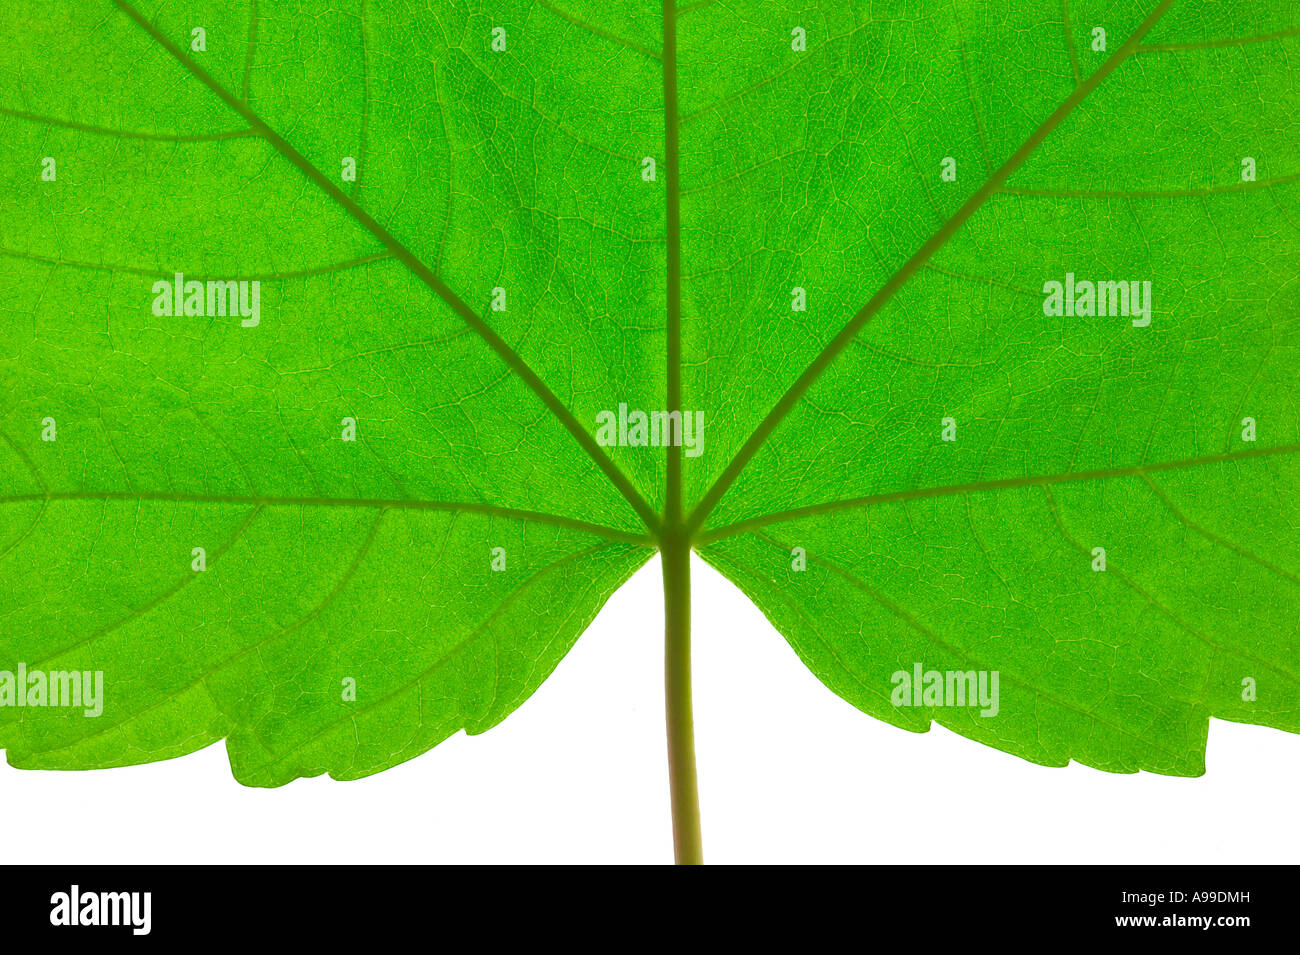 Macro shot of a green leaf with stem Stock Photo